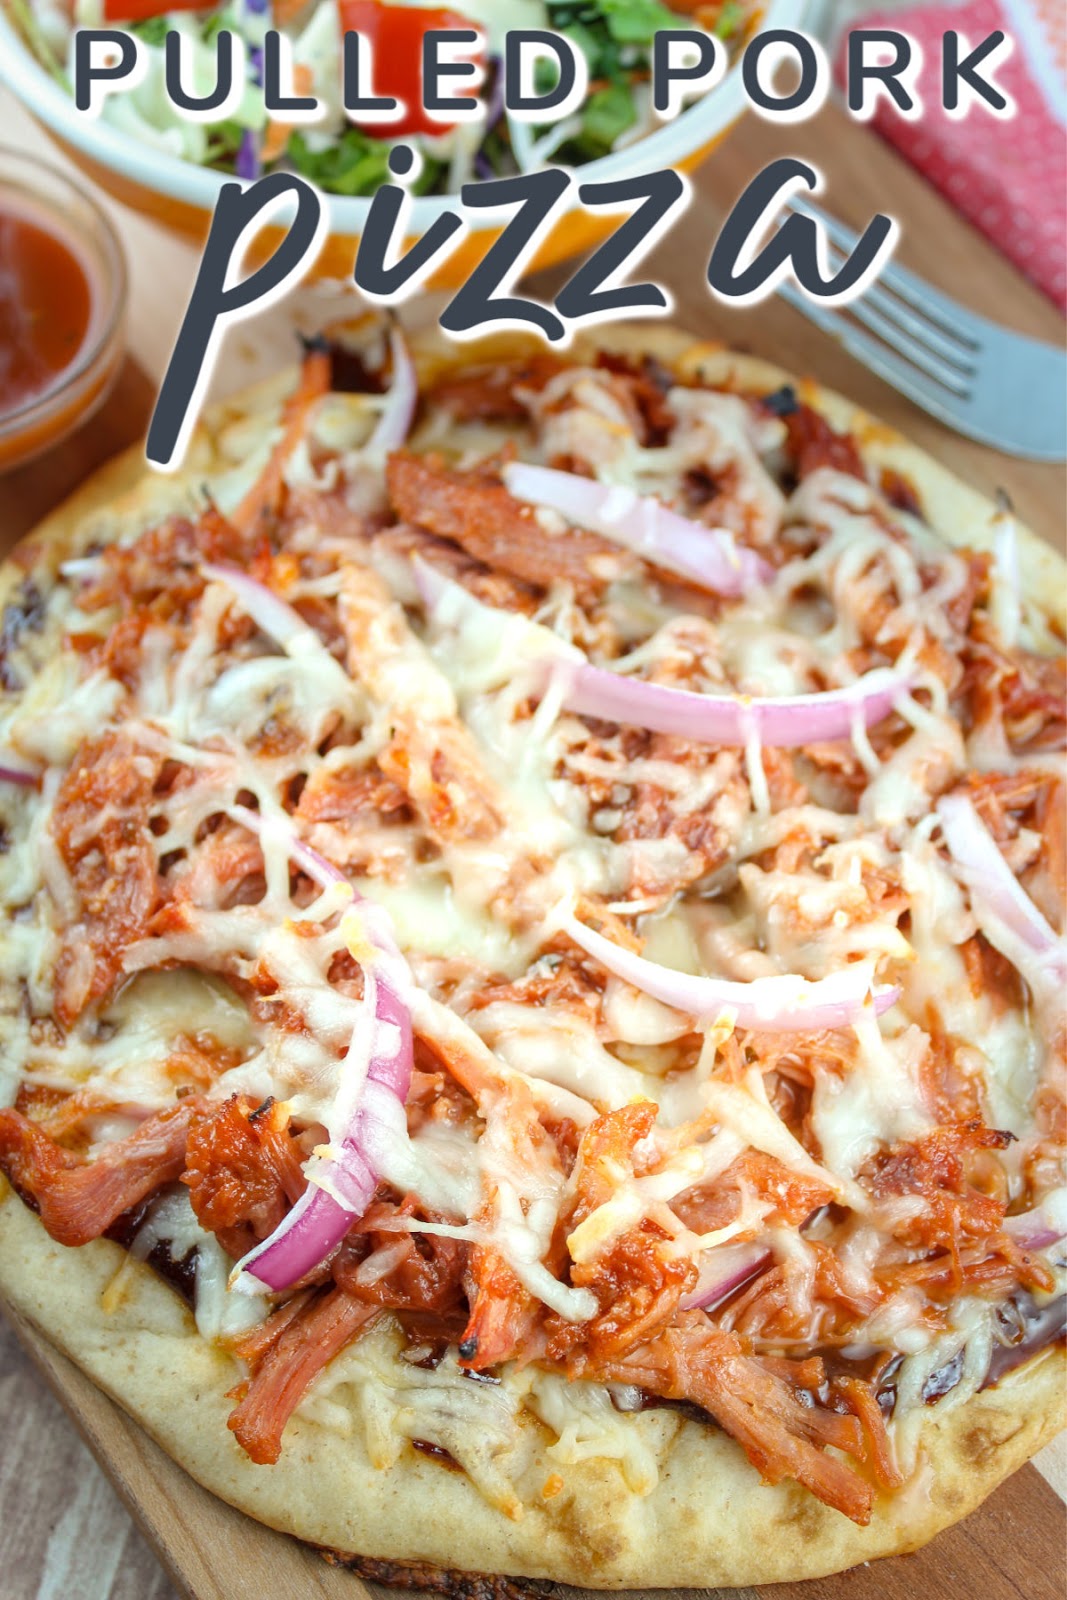 Pulled pork pizza is one of my favorites to make and it’s so easy! Pulled pork, barbecue sauce, cheese and red onions – you’ll love it! You can also make it in the air fryer!
 via @foodhussy